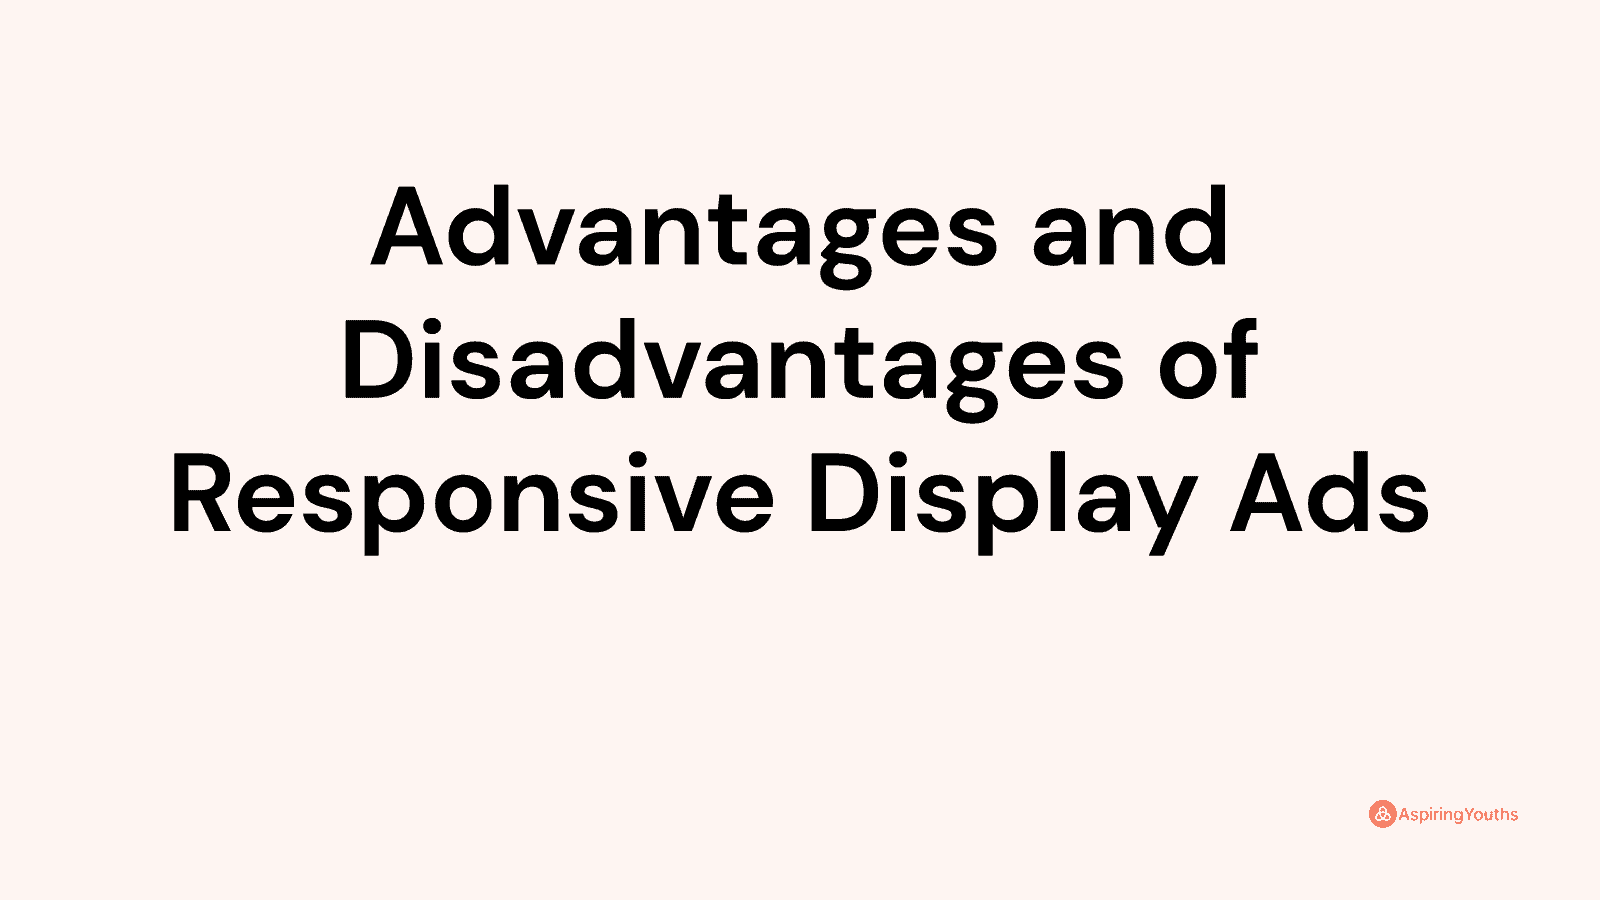 Advantages and disadvantages of Responsive Display Ads